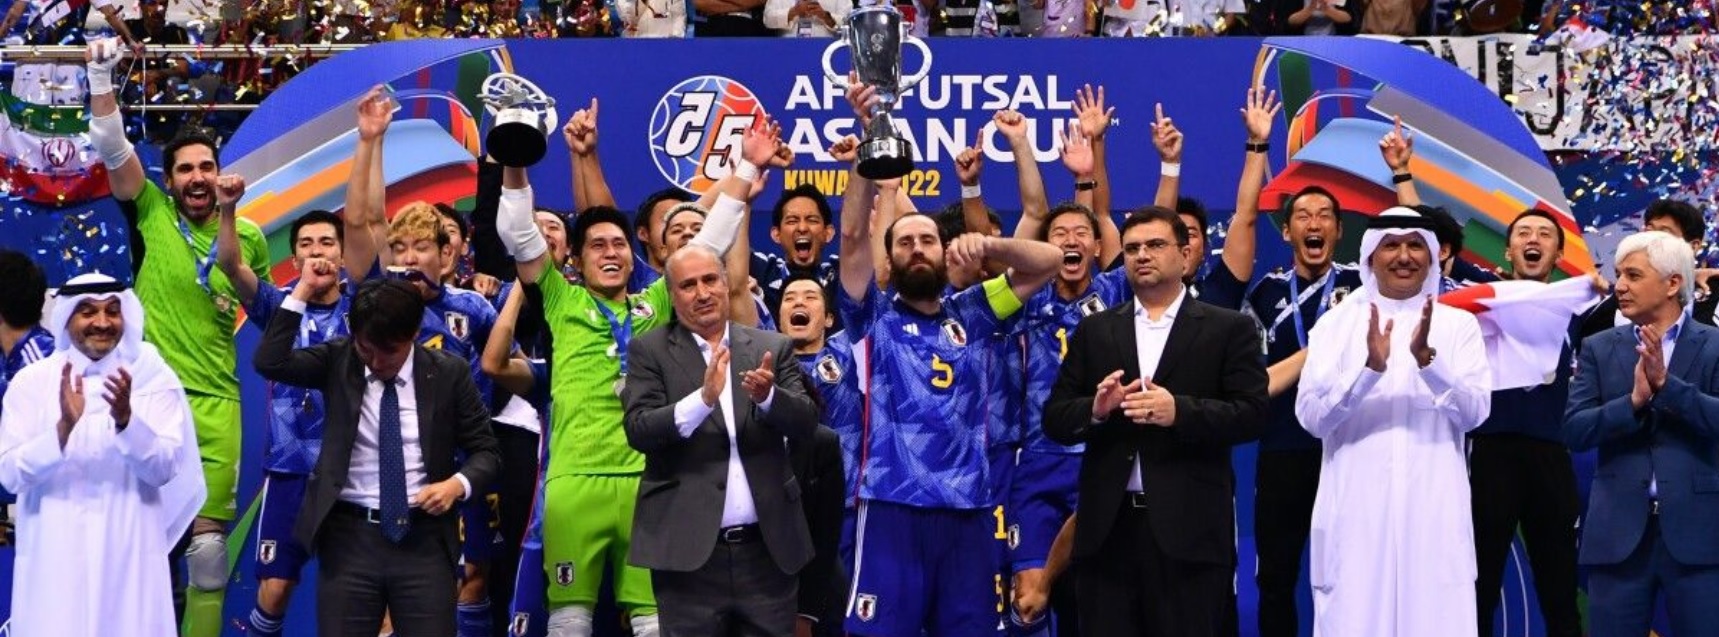 Japan defeated Iran in the final of the 16th Asian Futsal Championship